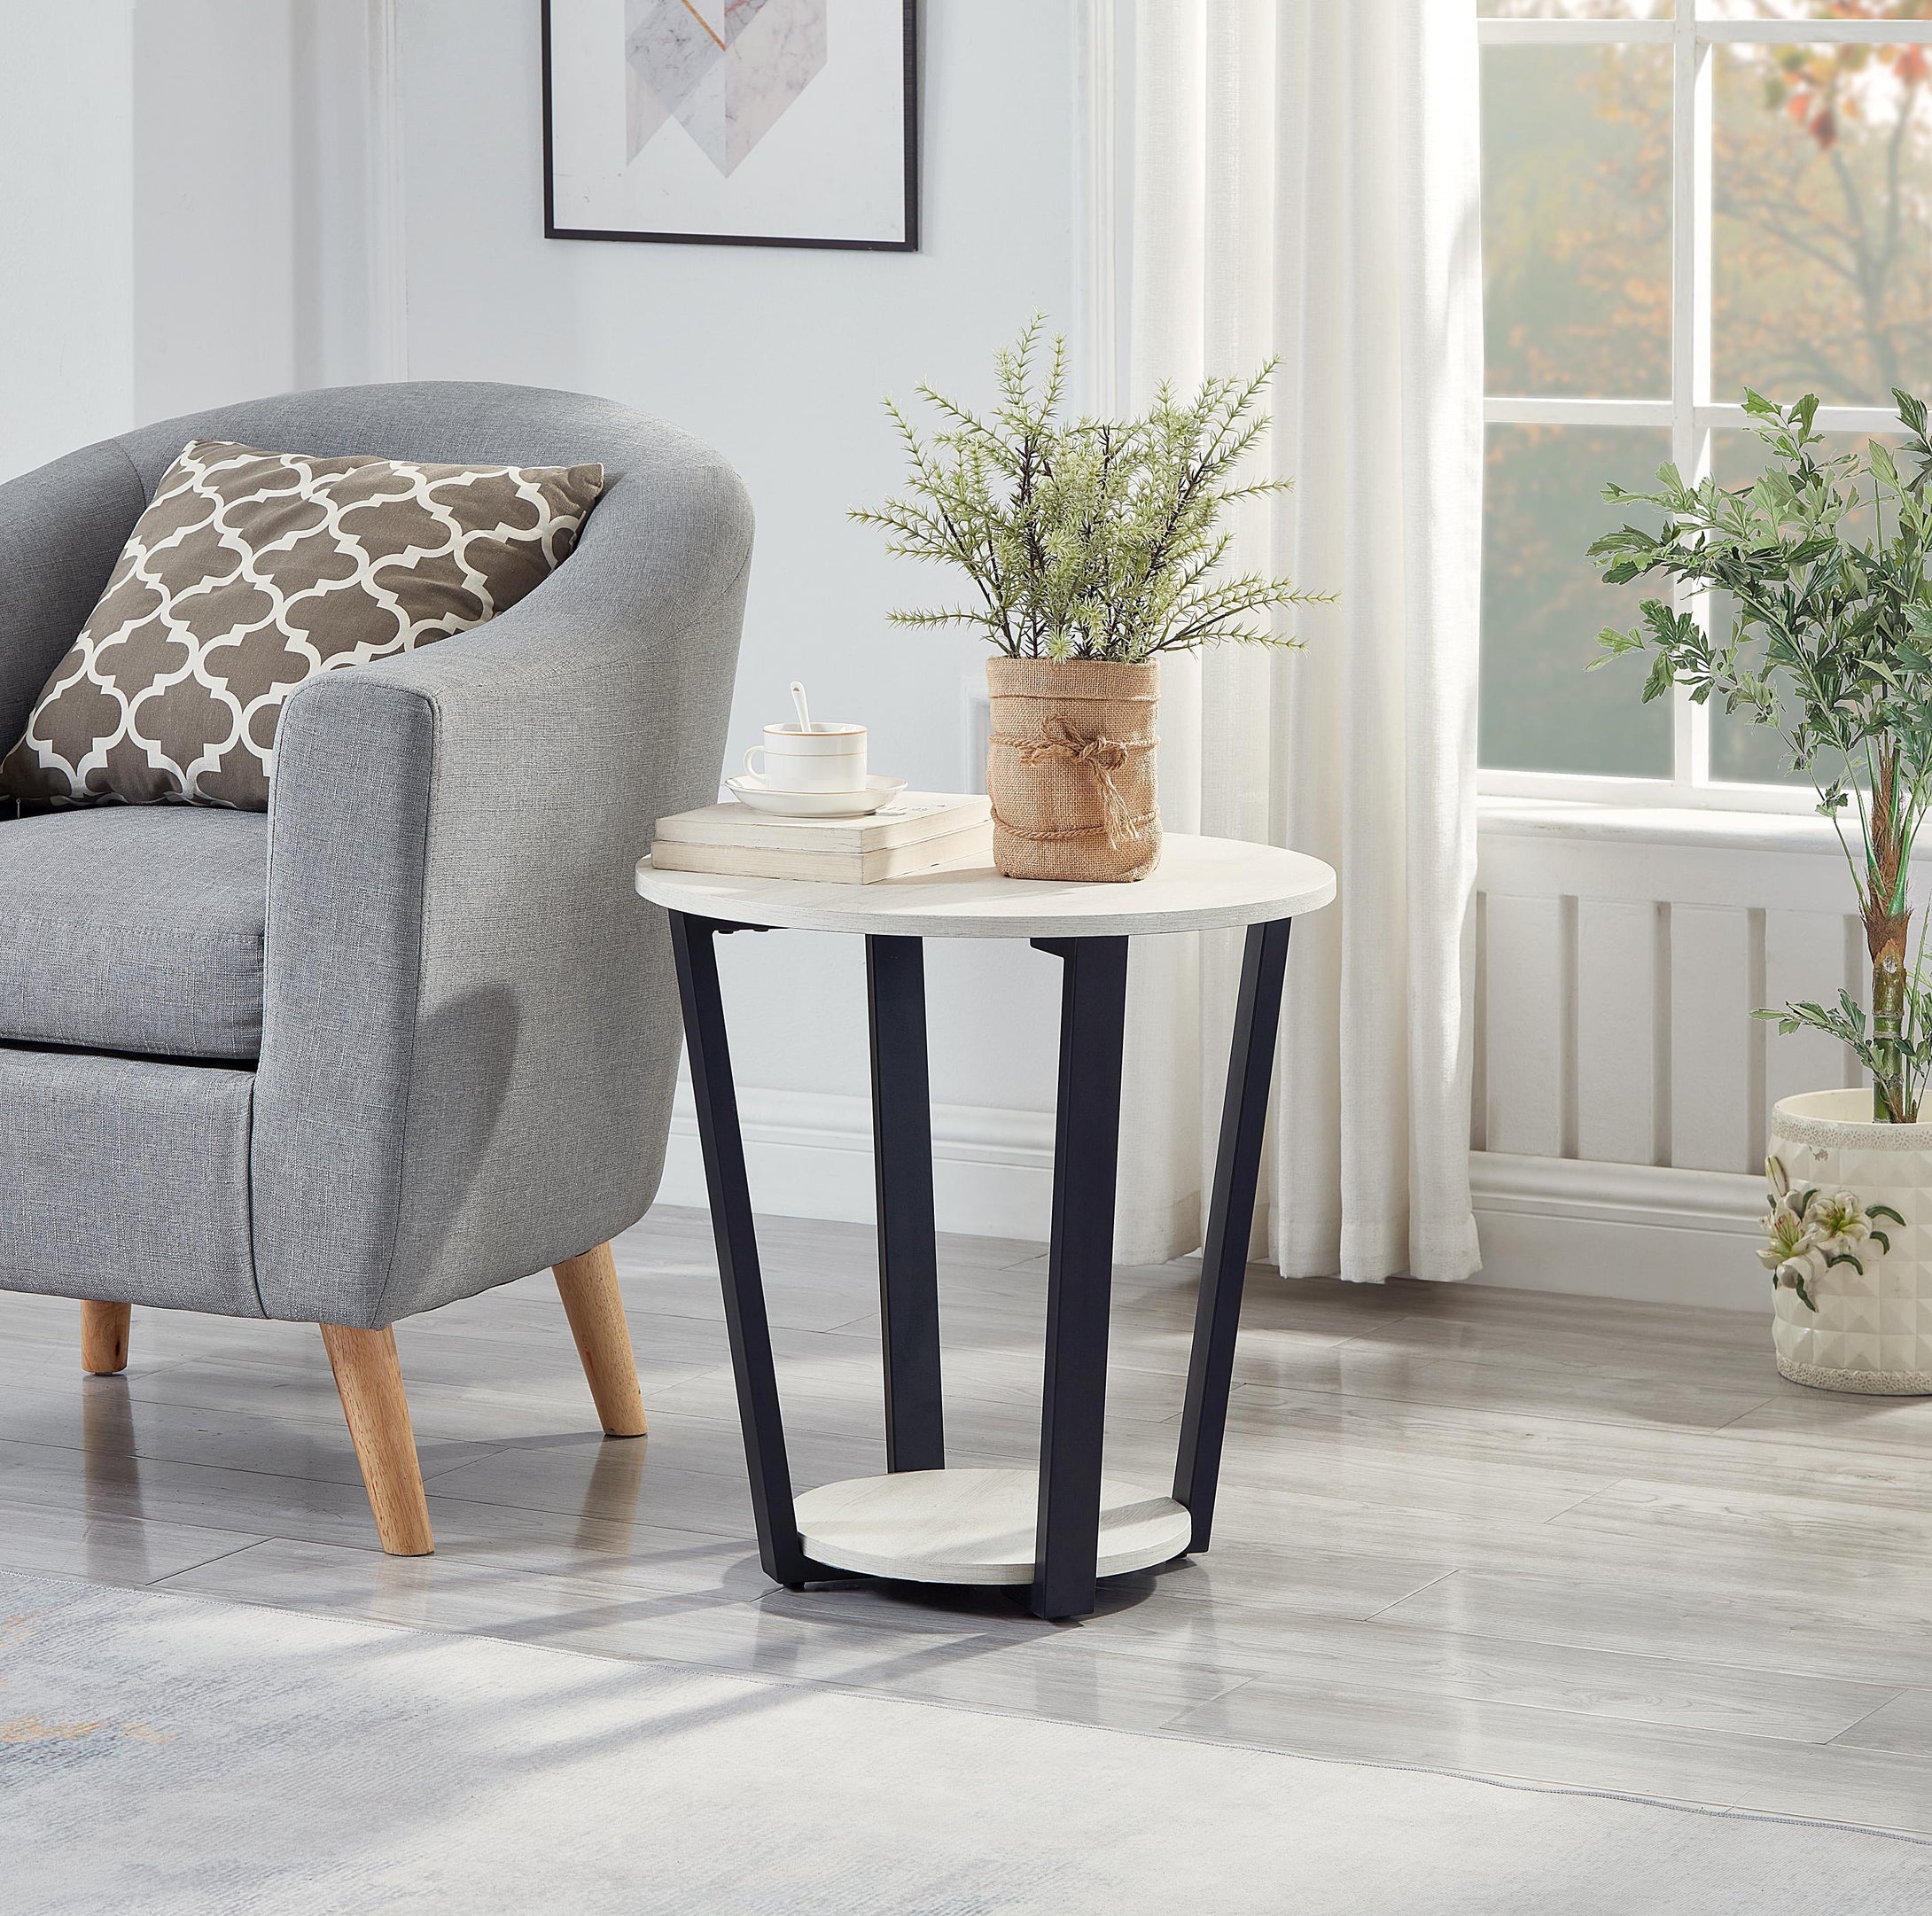 Elysian Contemporary Round End Table with Shelf, Off-White